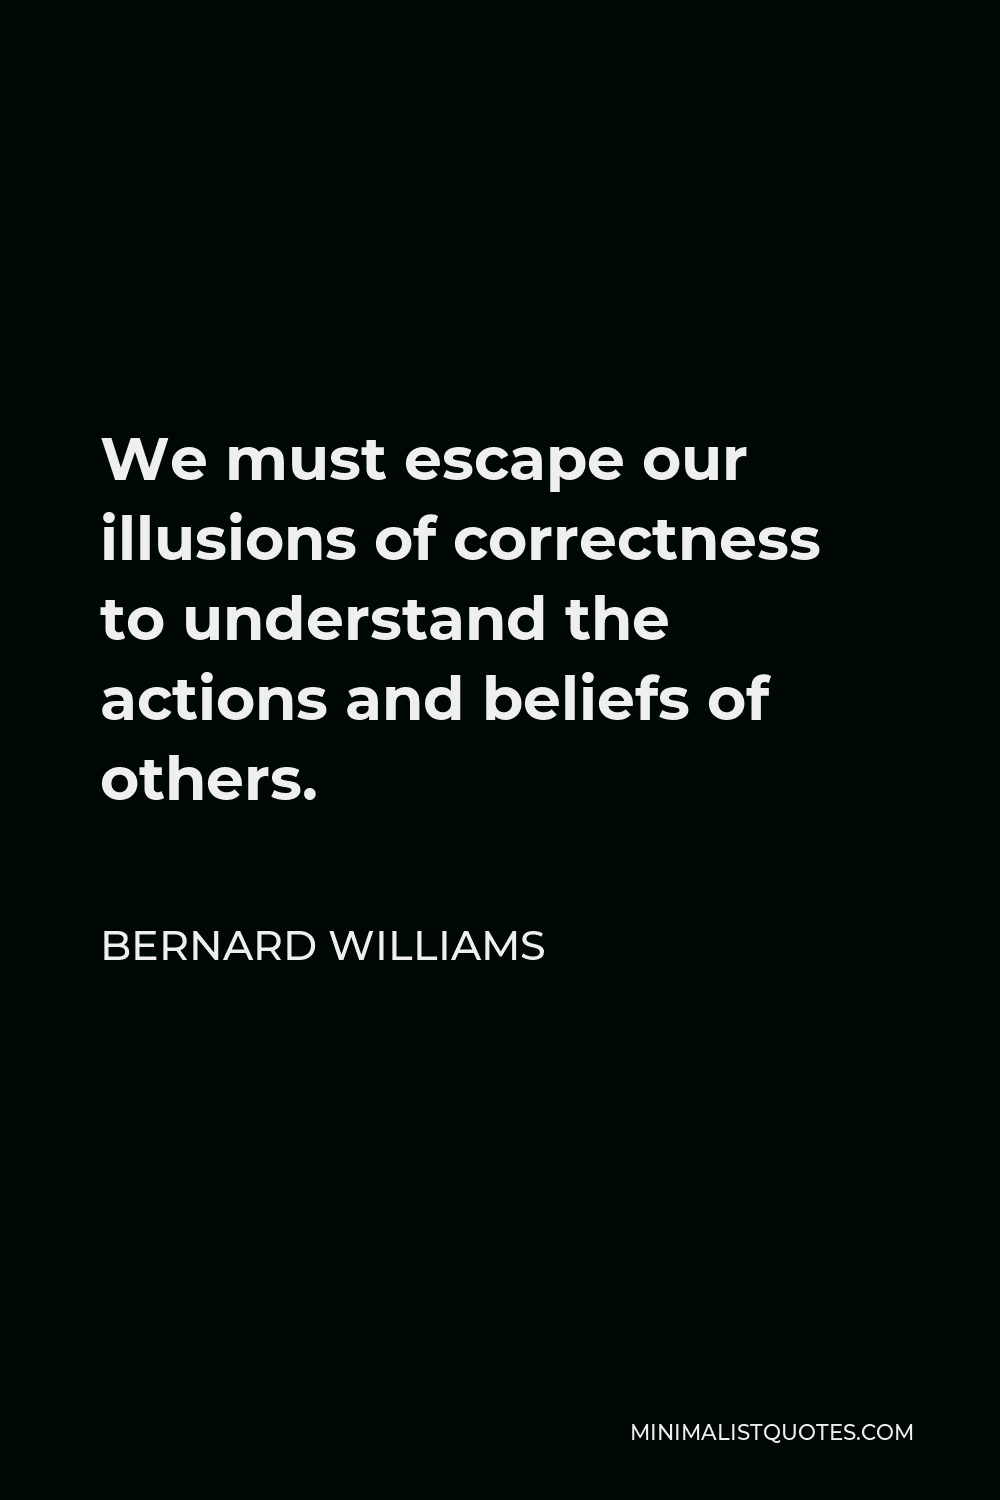 Bernard Williams Quote - We must escape our illusions of correctness to understand the actions and beliefs of others.